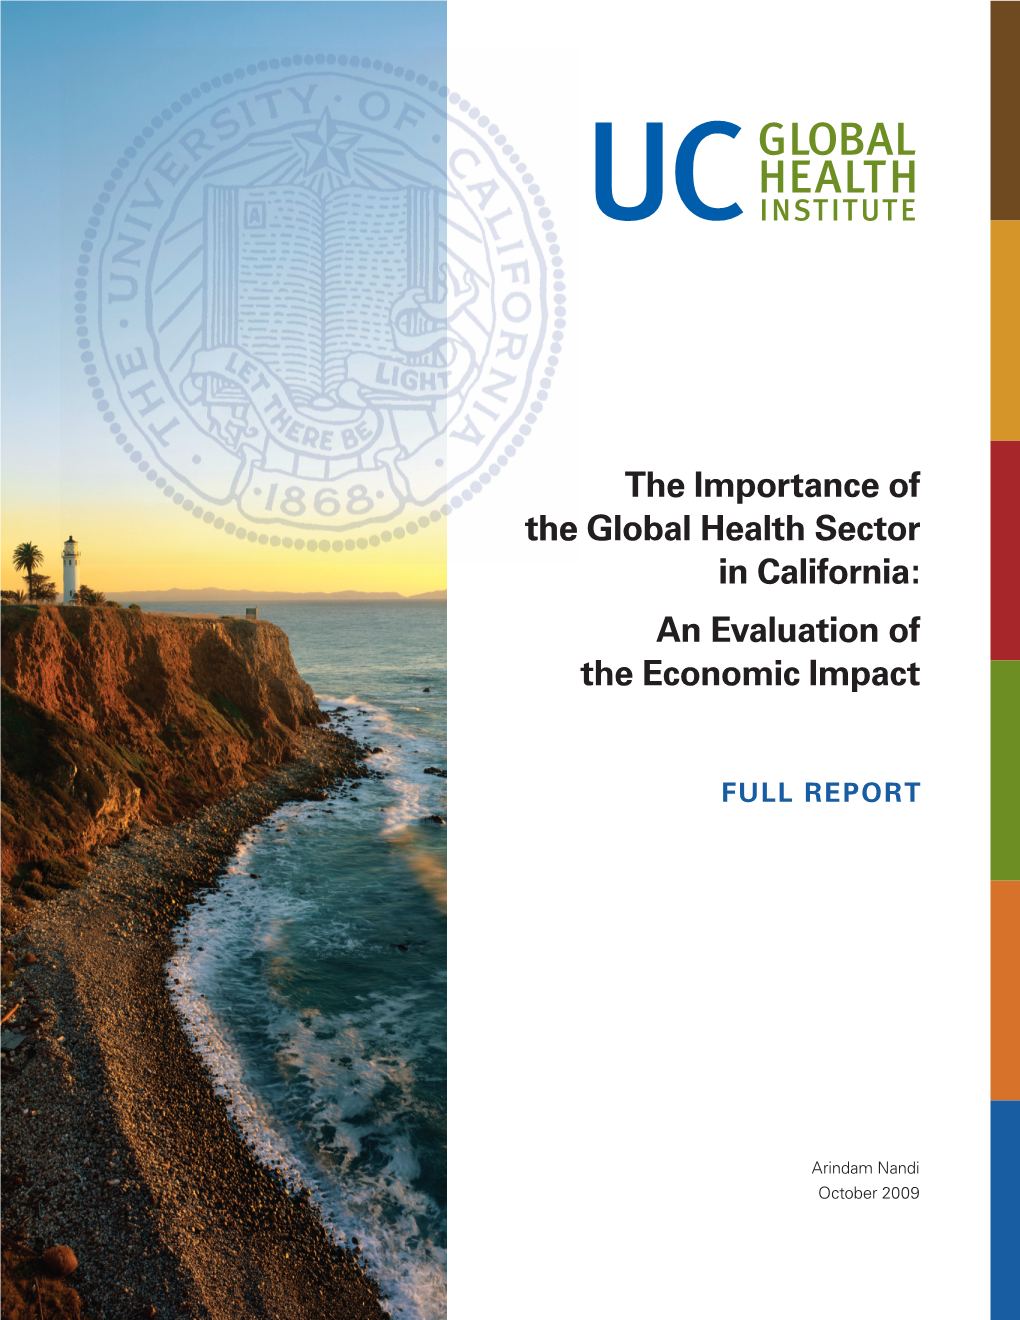 The Importance of the Global Health Sector in California: an Evaluation of the Economic Impact